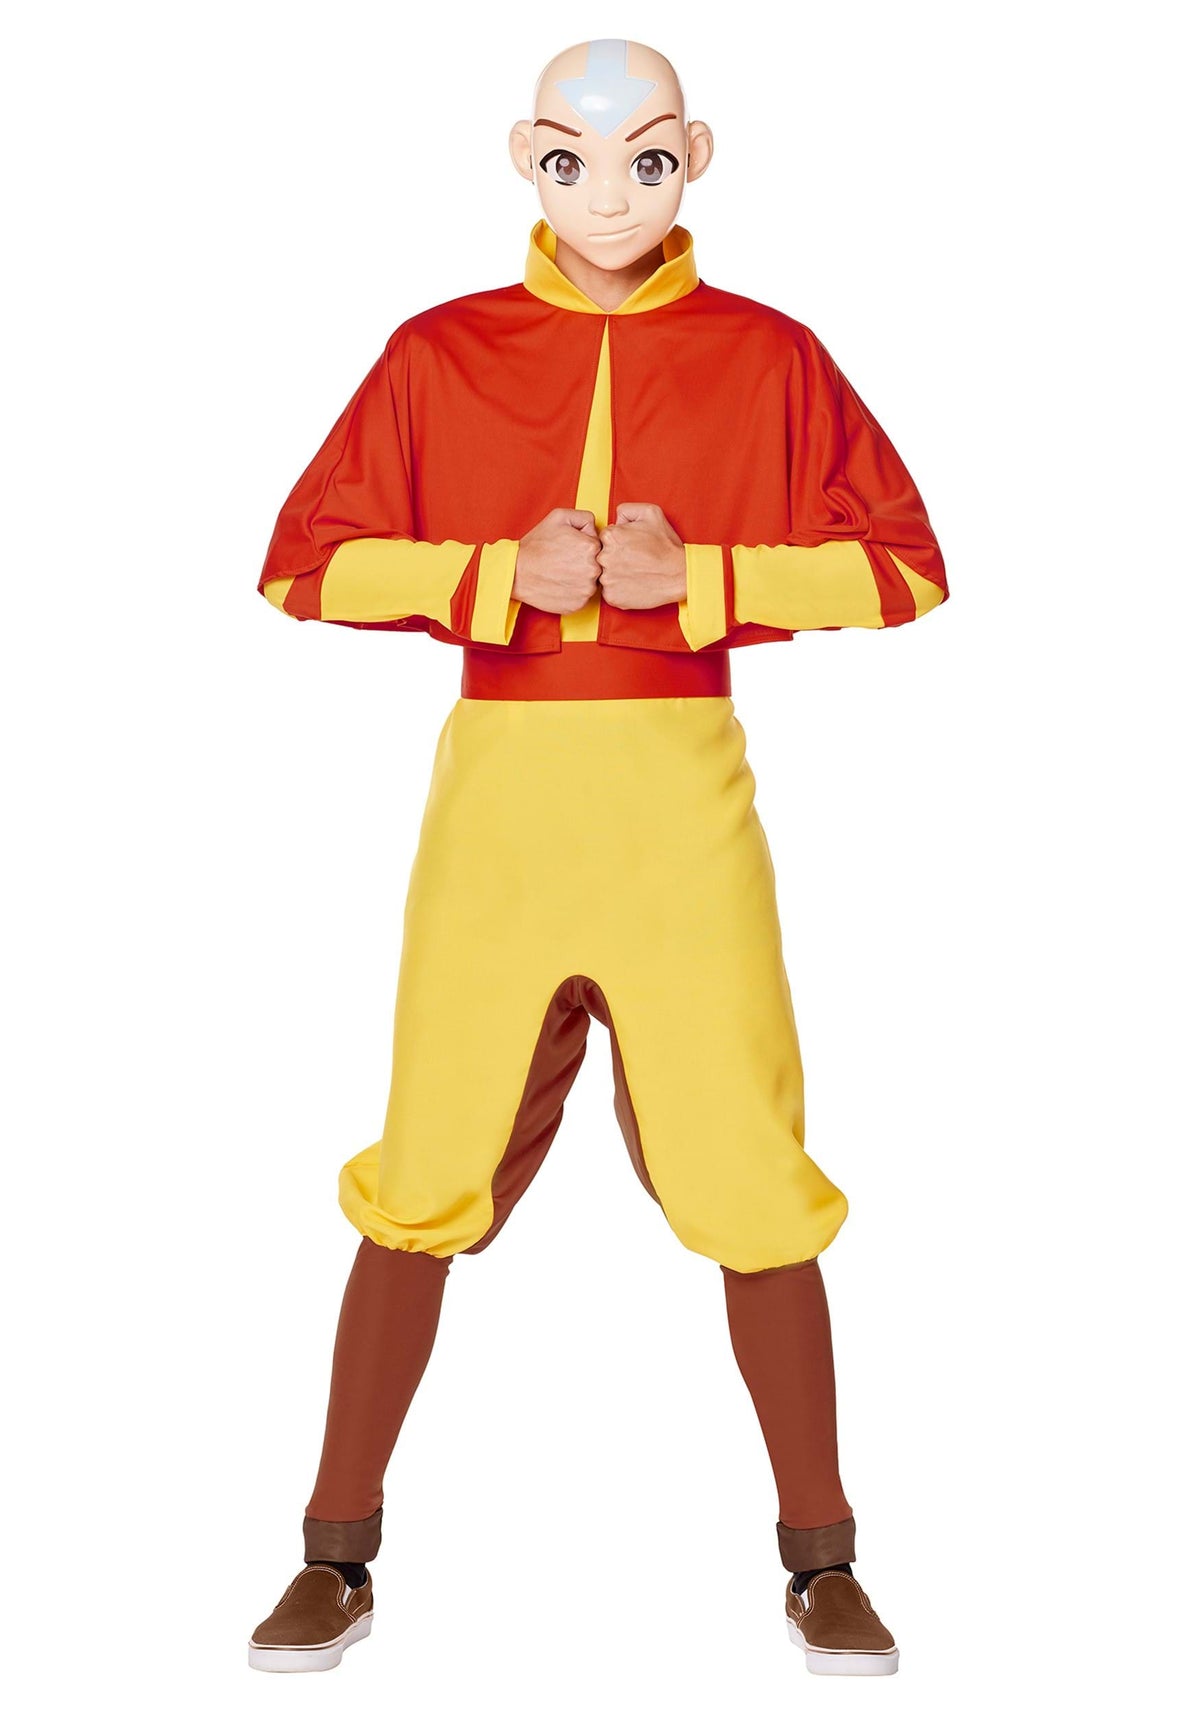 Avatar: The Last Airbender Aang Child Costume